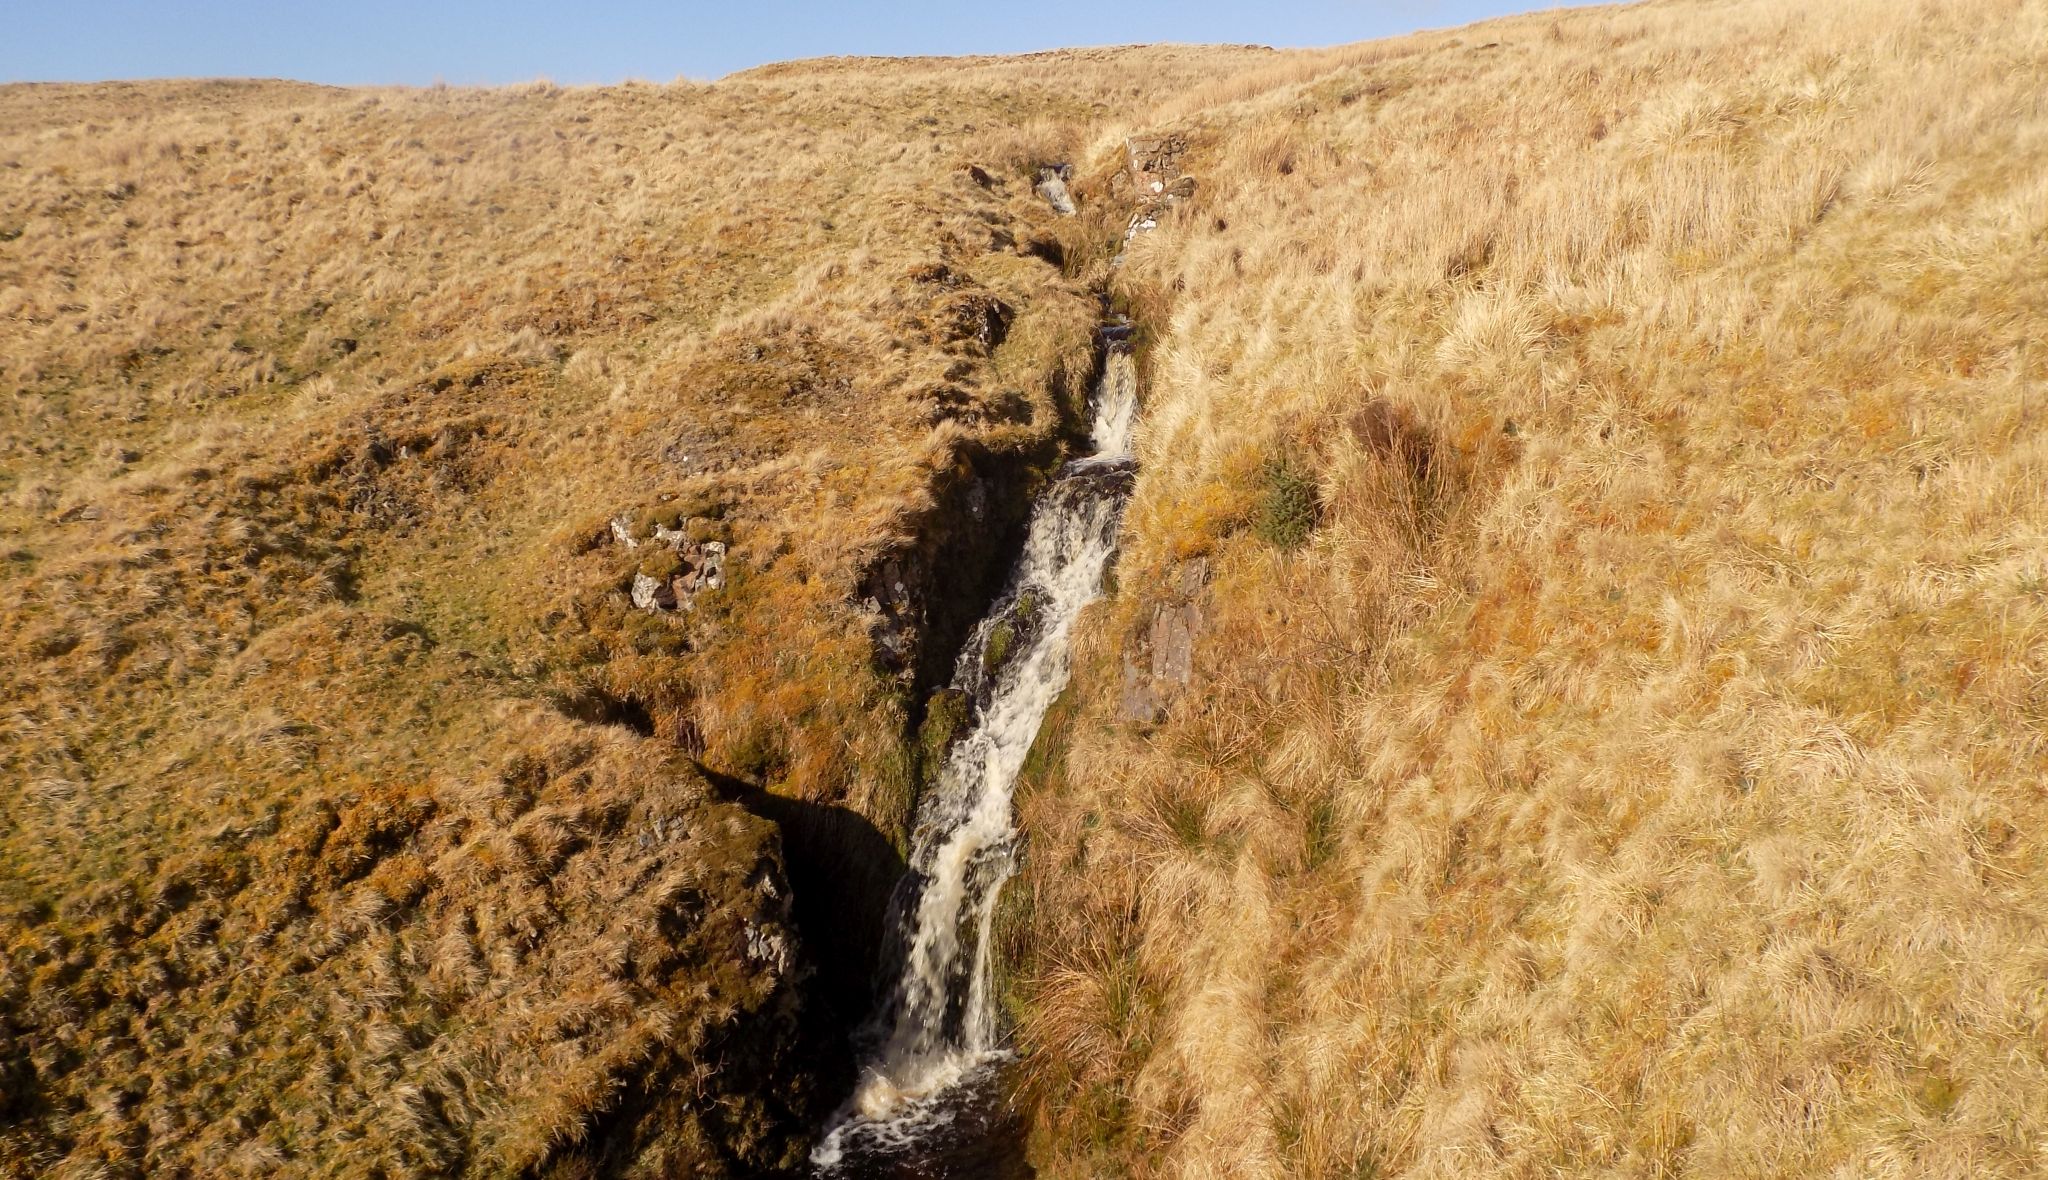 Waterfall in Fintry Hills on route to Double Craigs